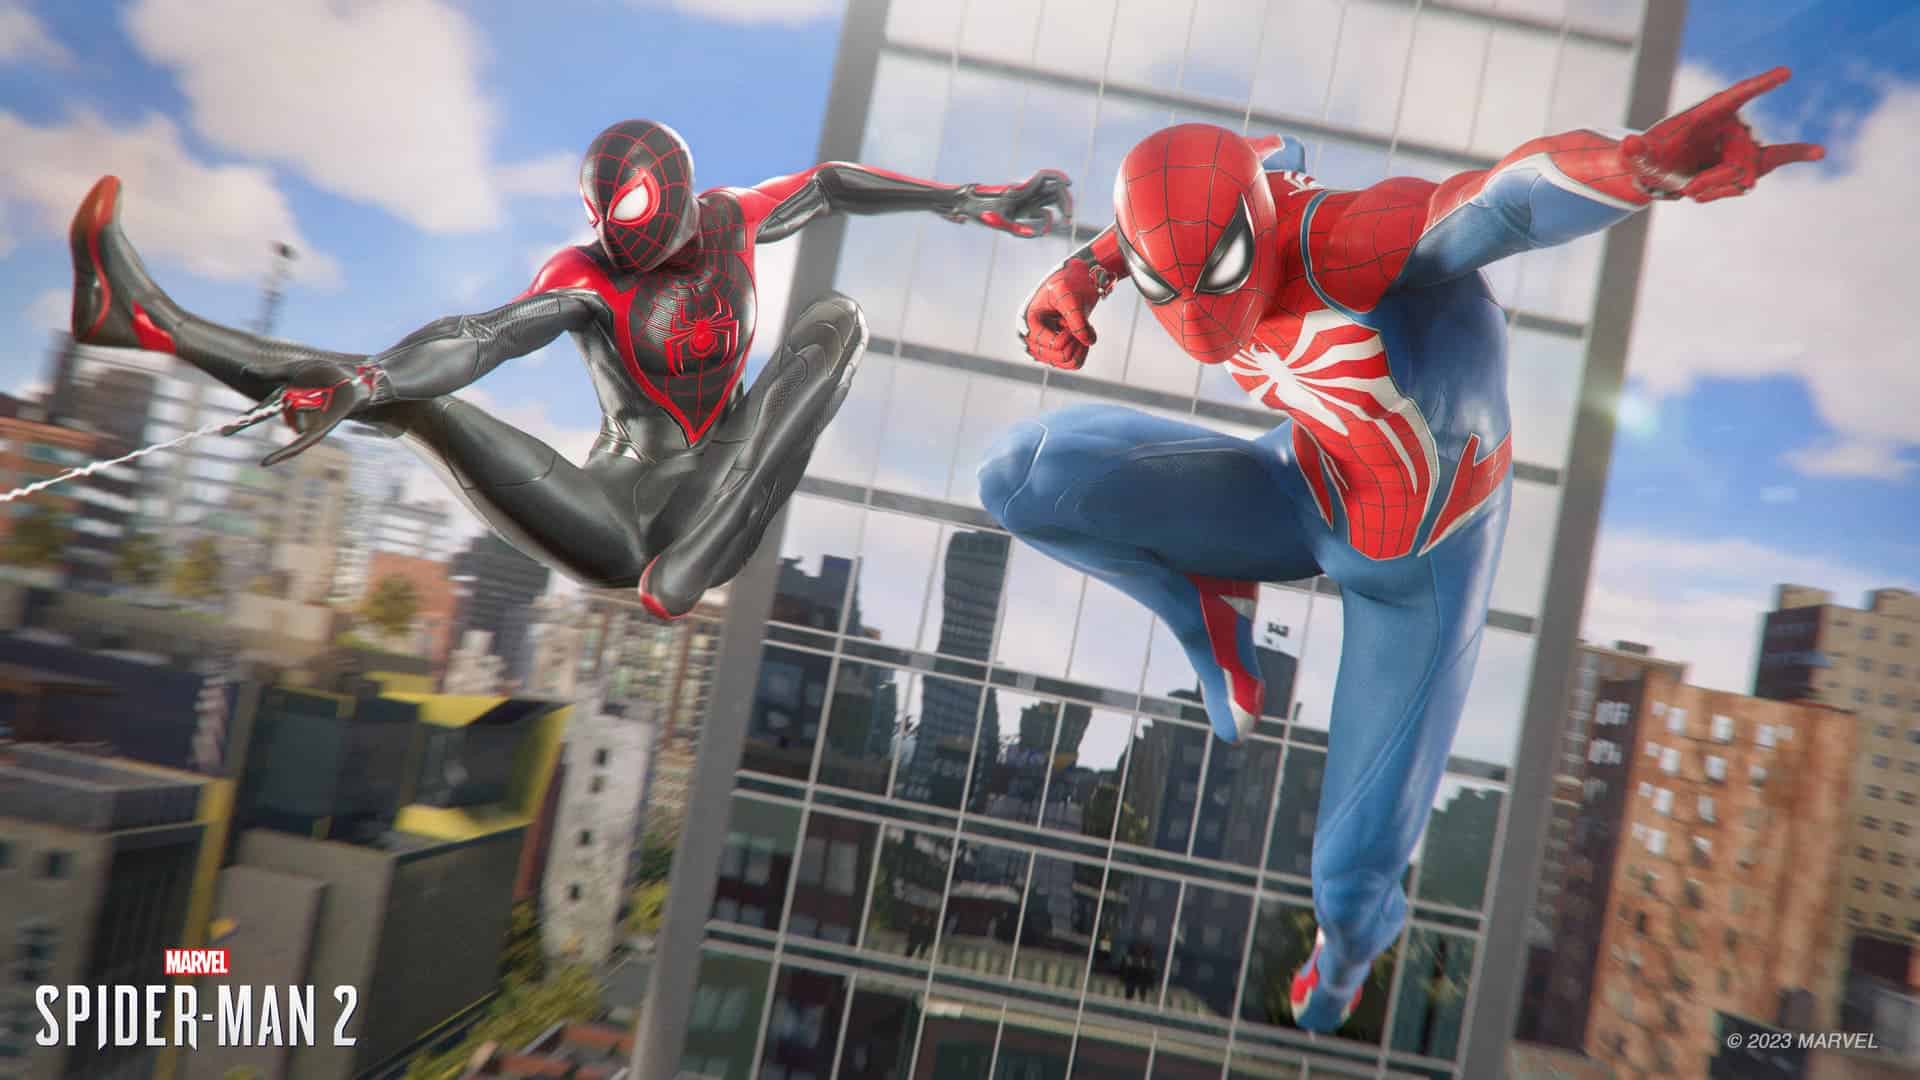 Spider-Man 2 PS5 preload is live – download size, and how to preload